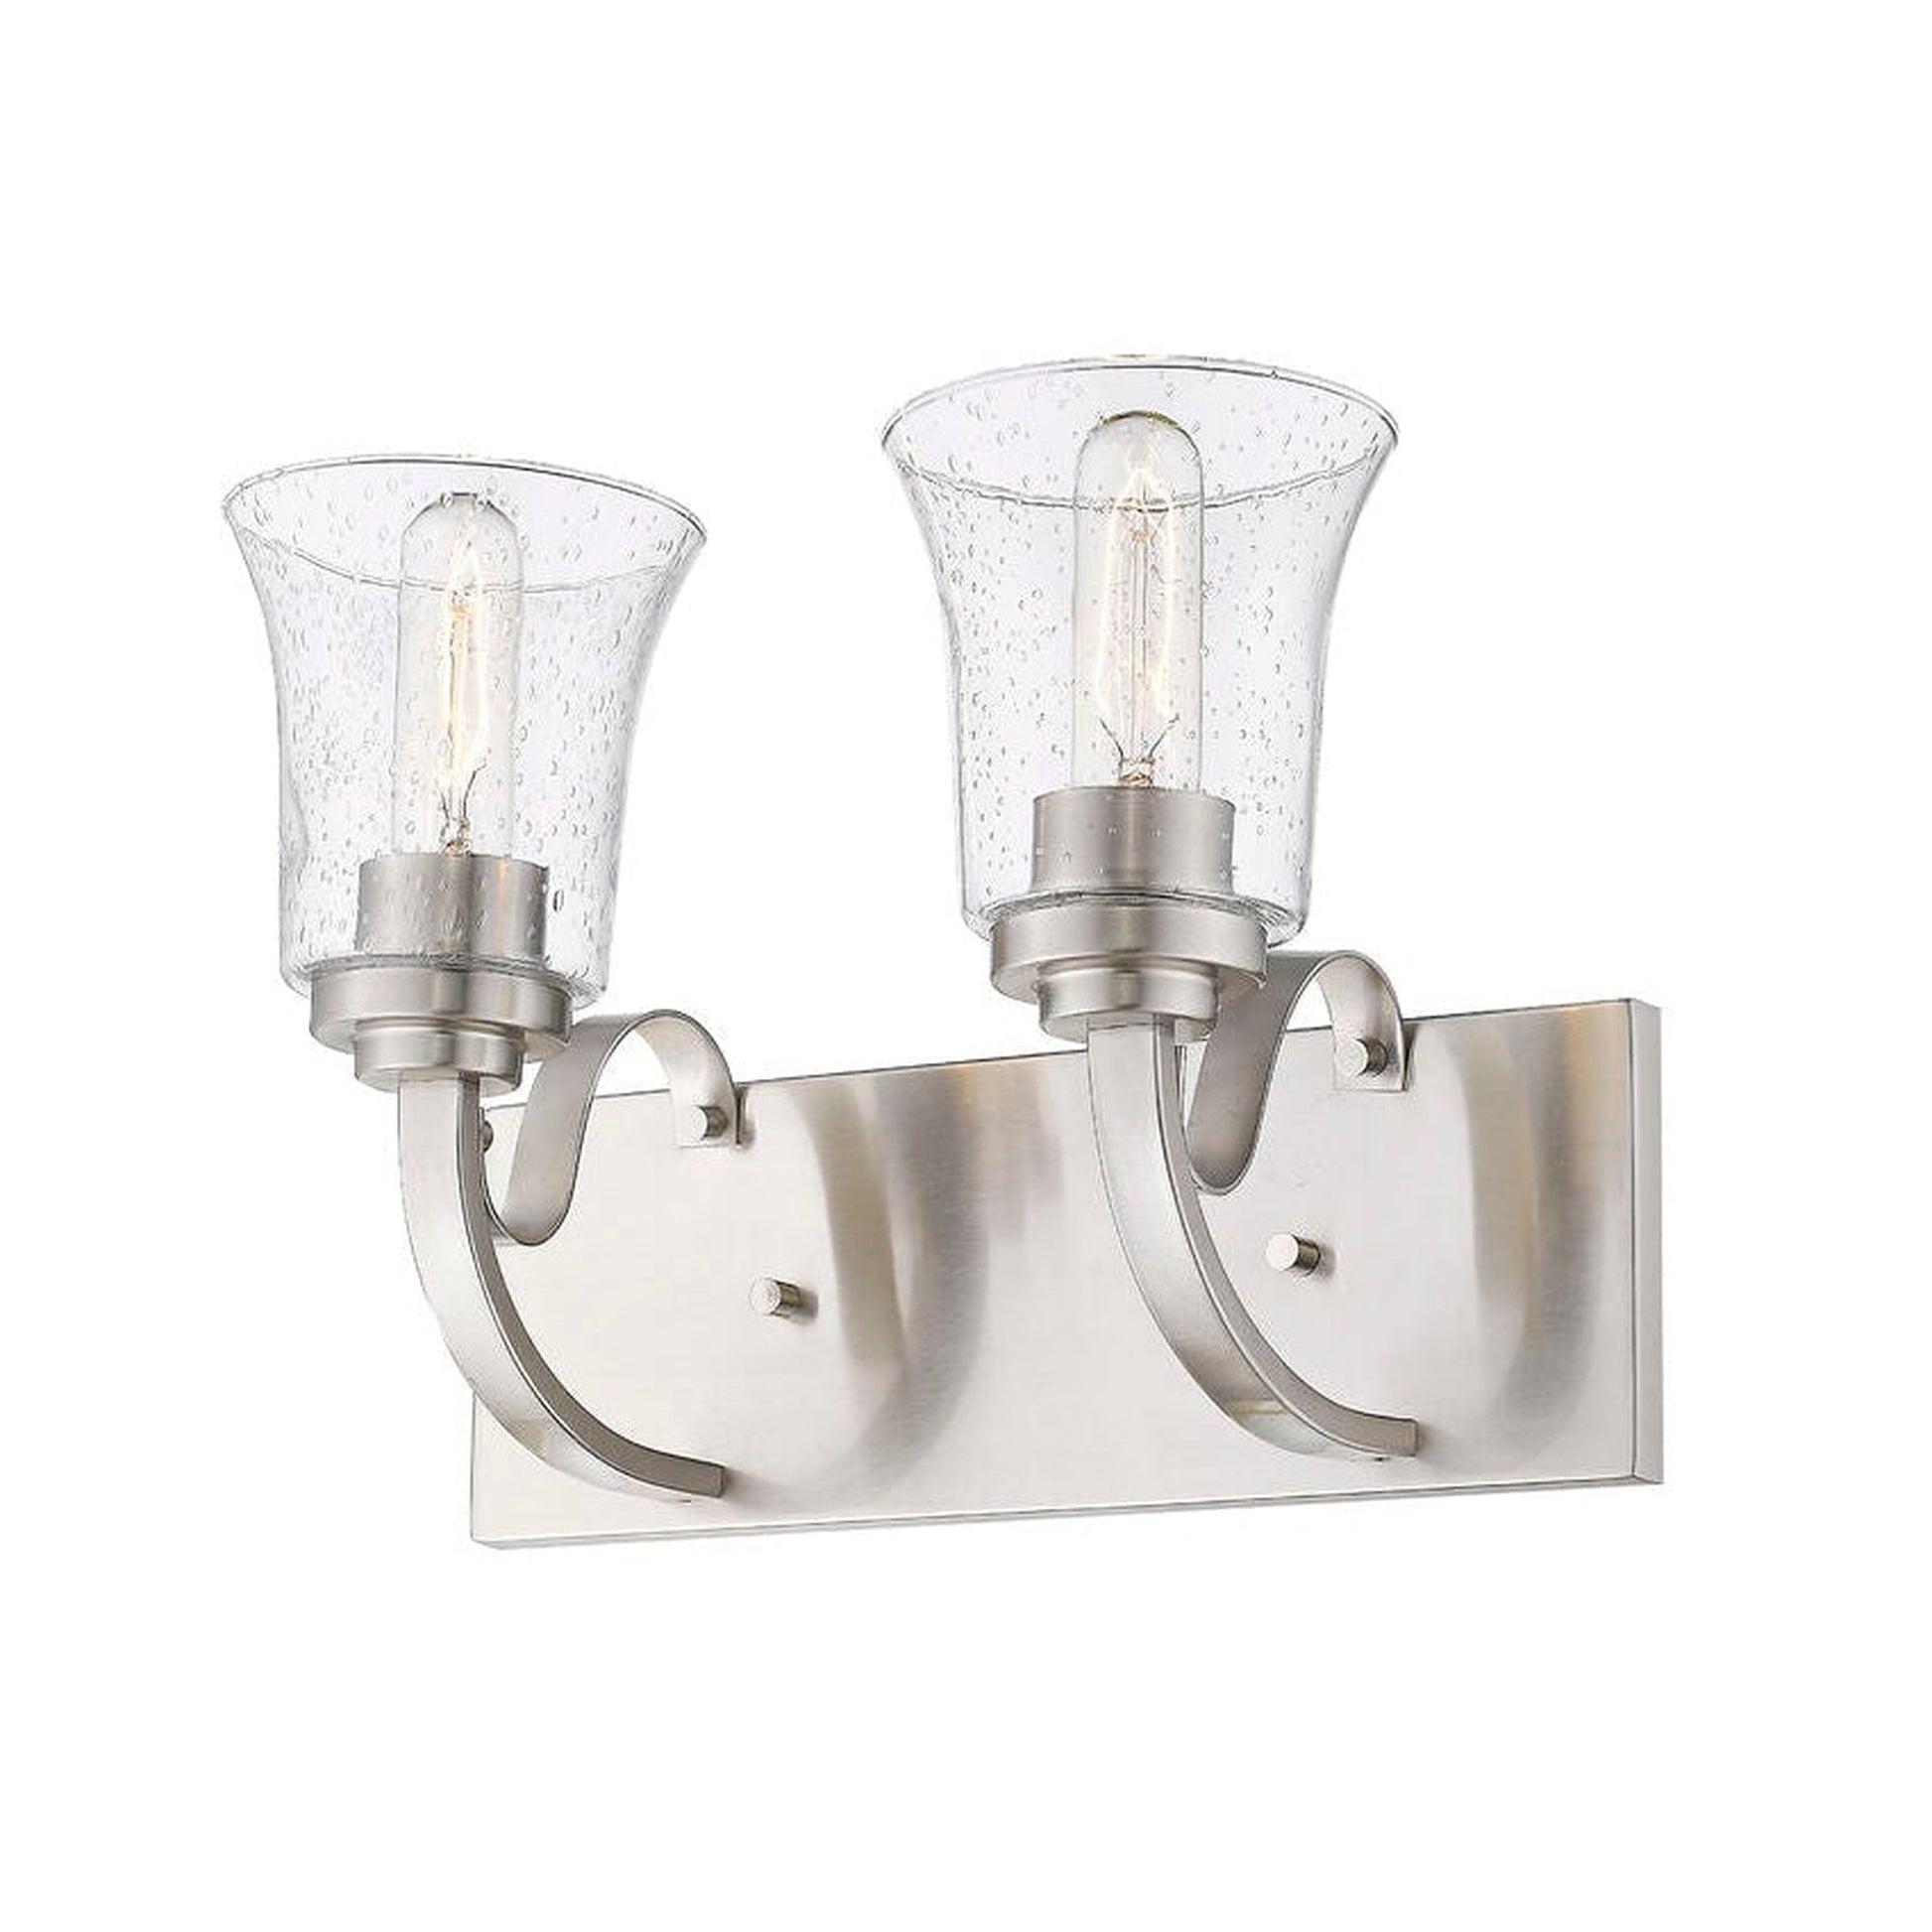 Z-Lite Halliwell 14" 2-Light Brushed Nickel Vanity Light With Clear Seedy Glass Shade